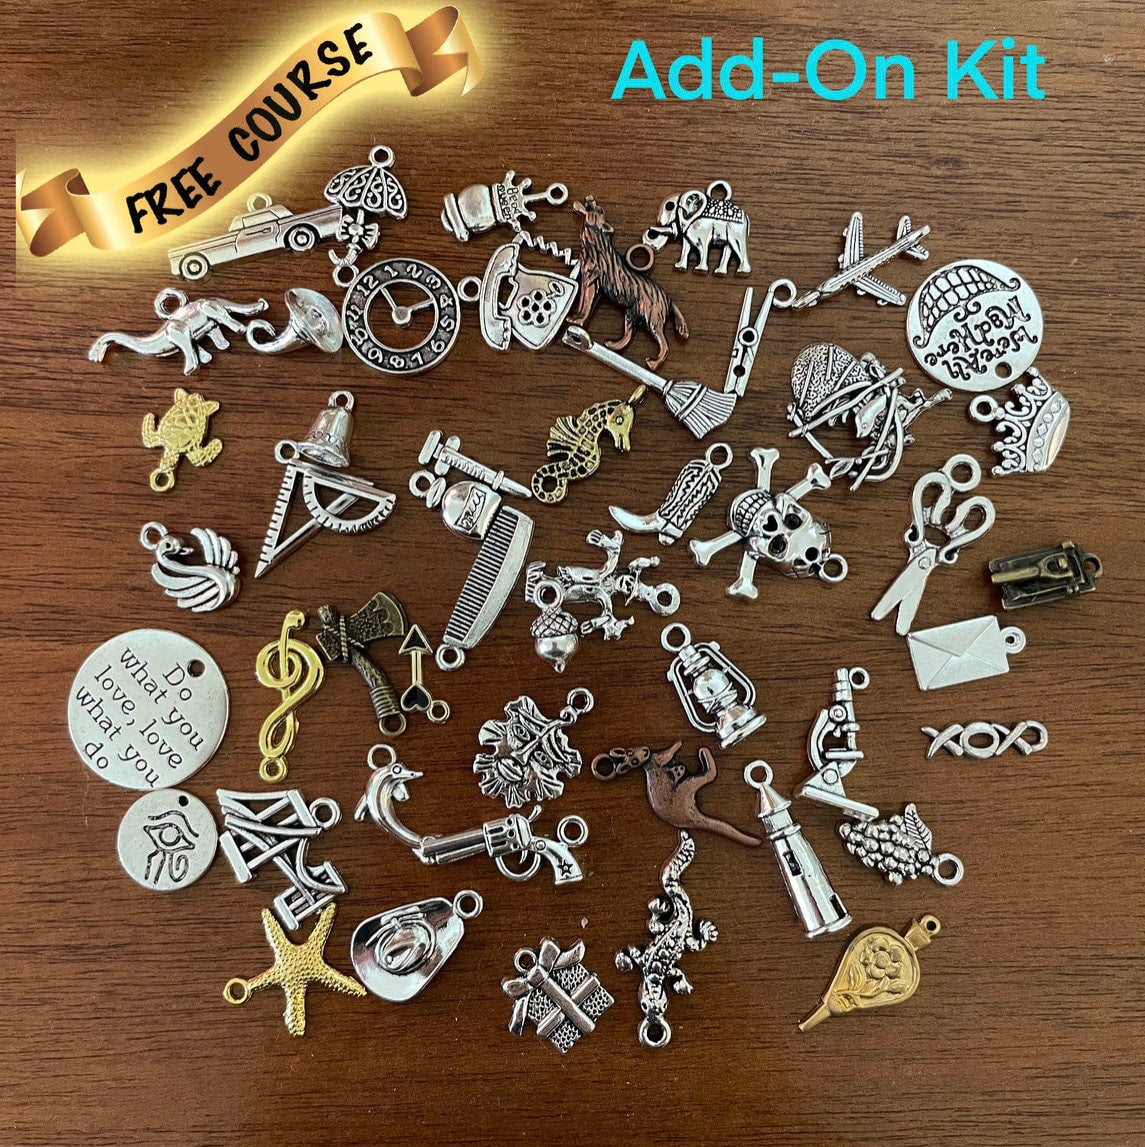 Charms, Confetti scoops, Fortune telling, Divination sets, Fortune teller, Charm kit, Charm casting, Charm divination, Divination kit, Charm confetti, Charm readings, Tarot reading charms, Charm casting kit.